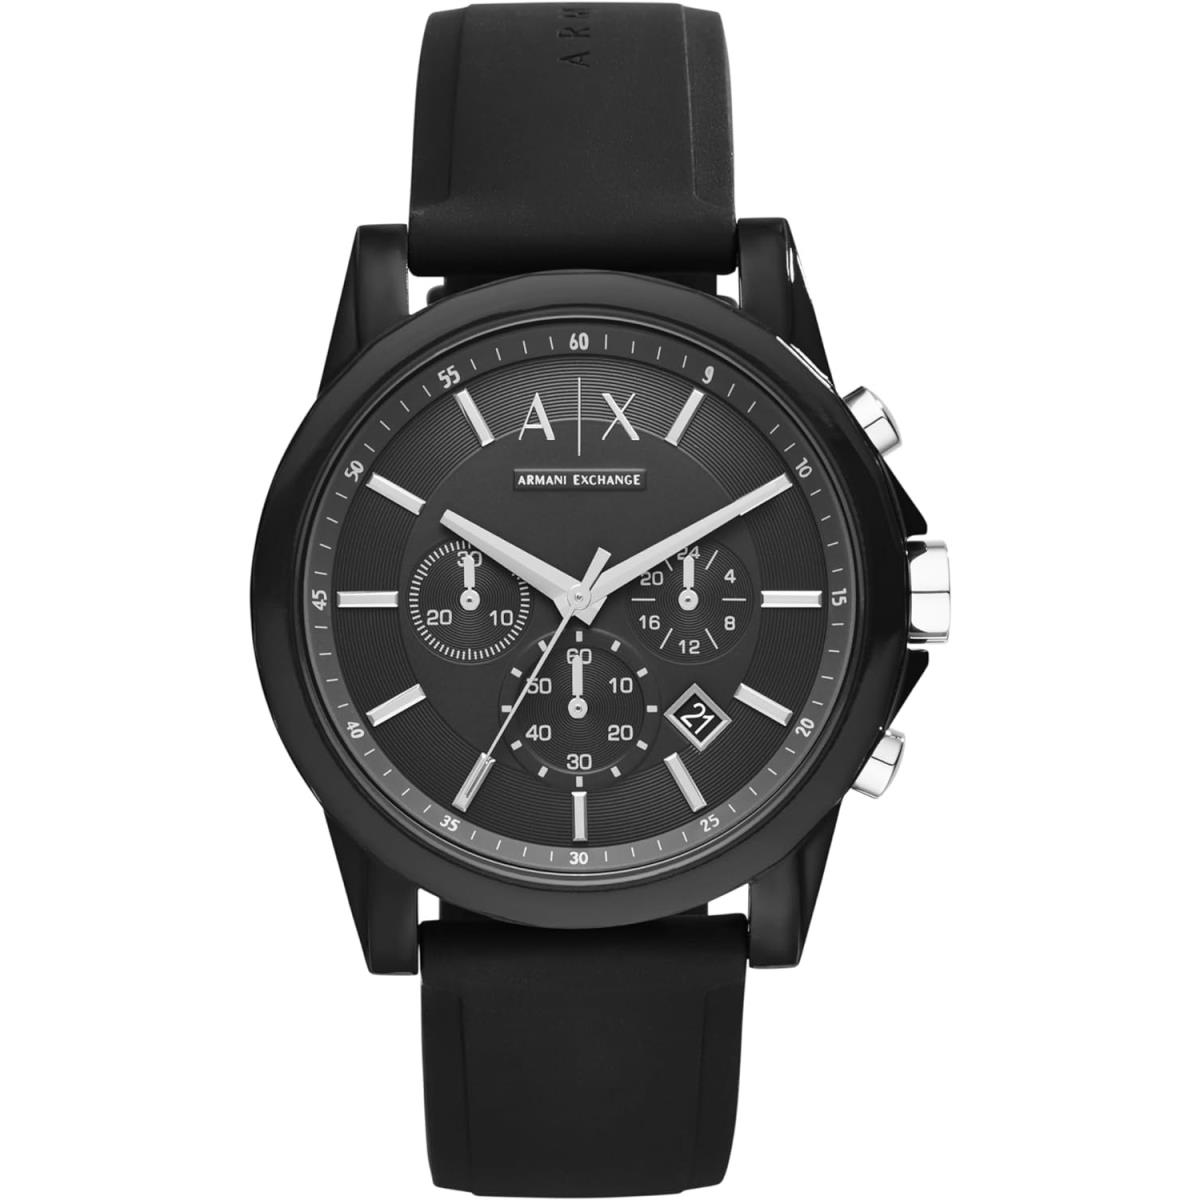 Armani Exchange Men`s Chronograph Watch with Band Options Black/Black Silicone